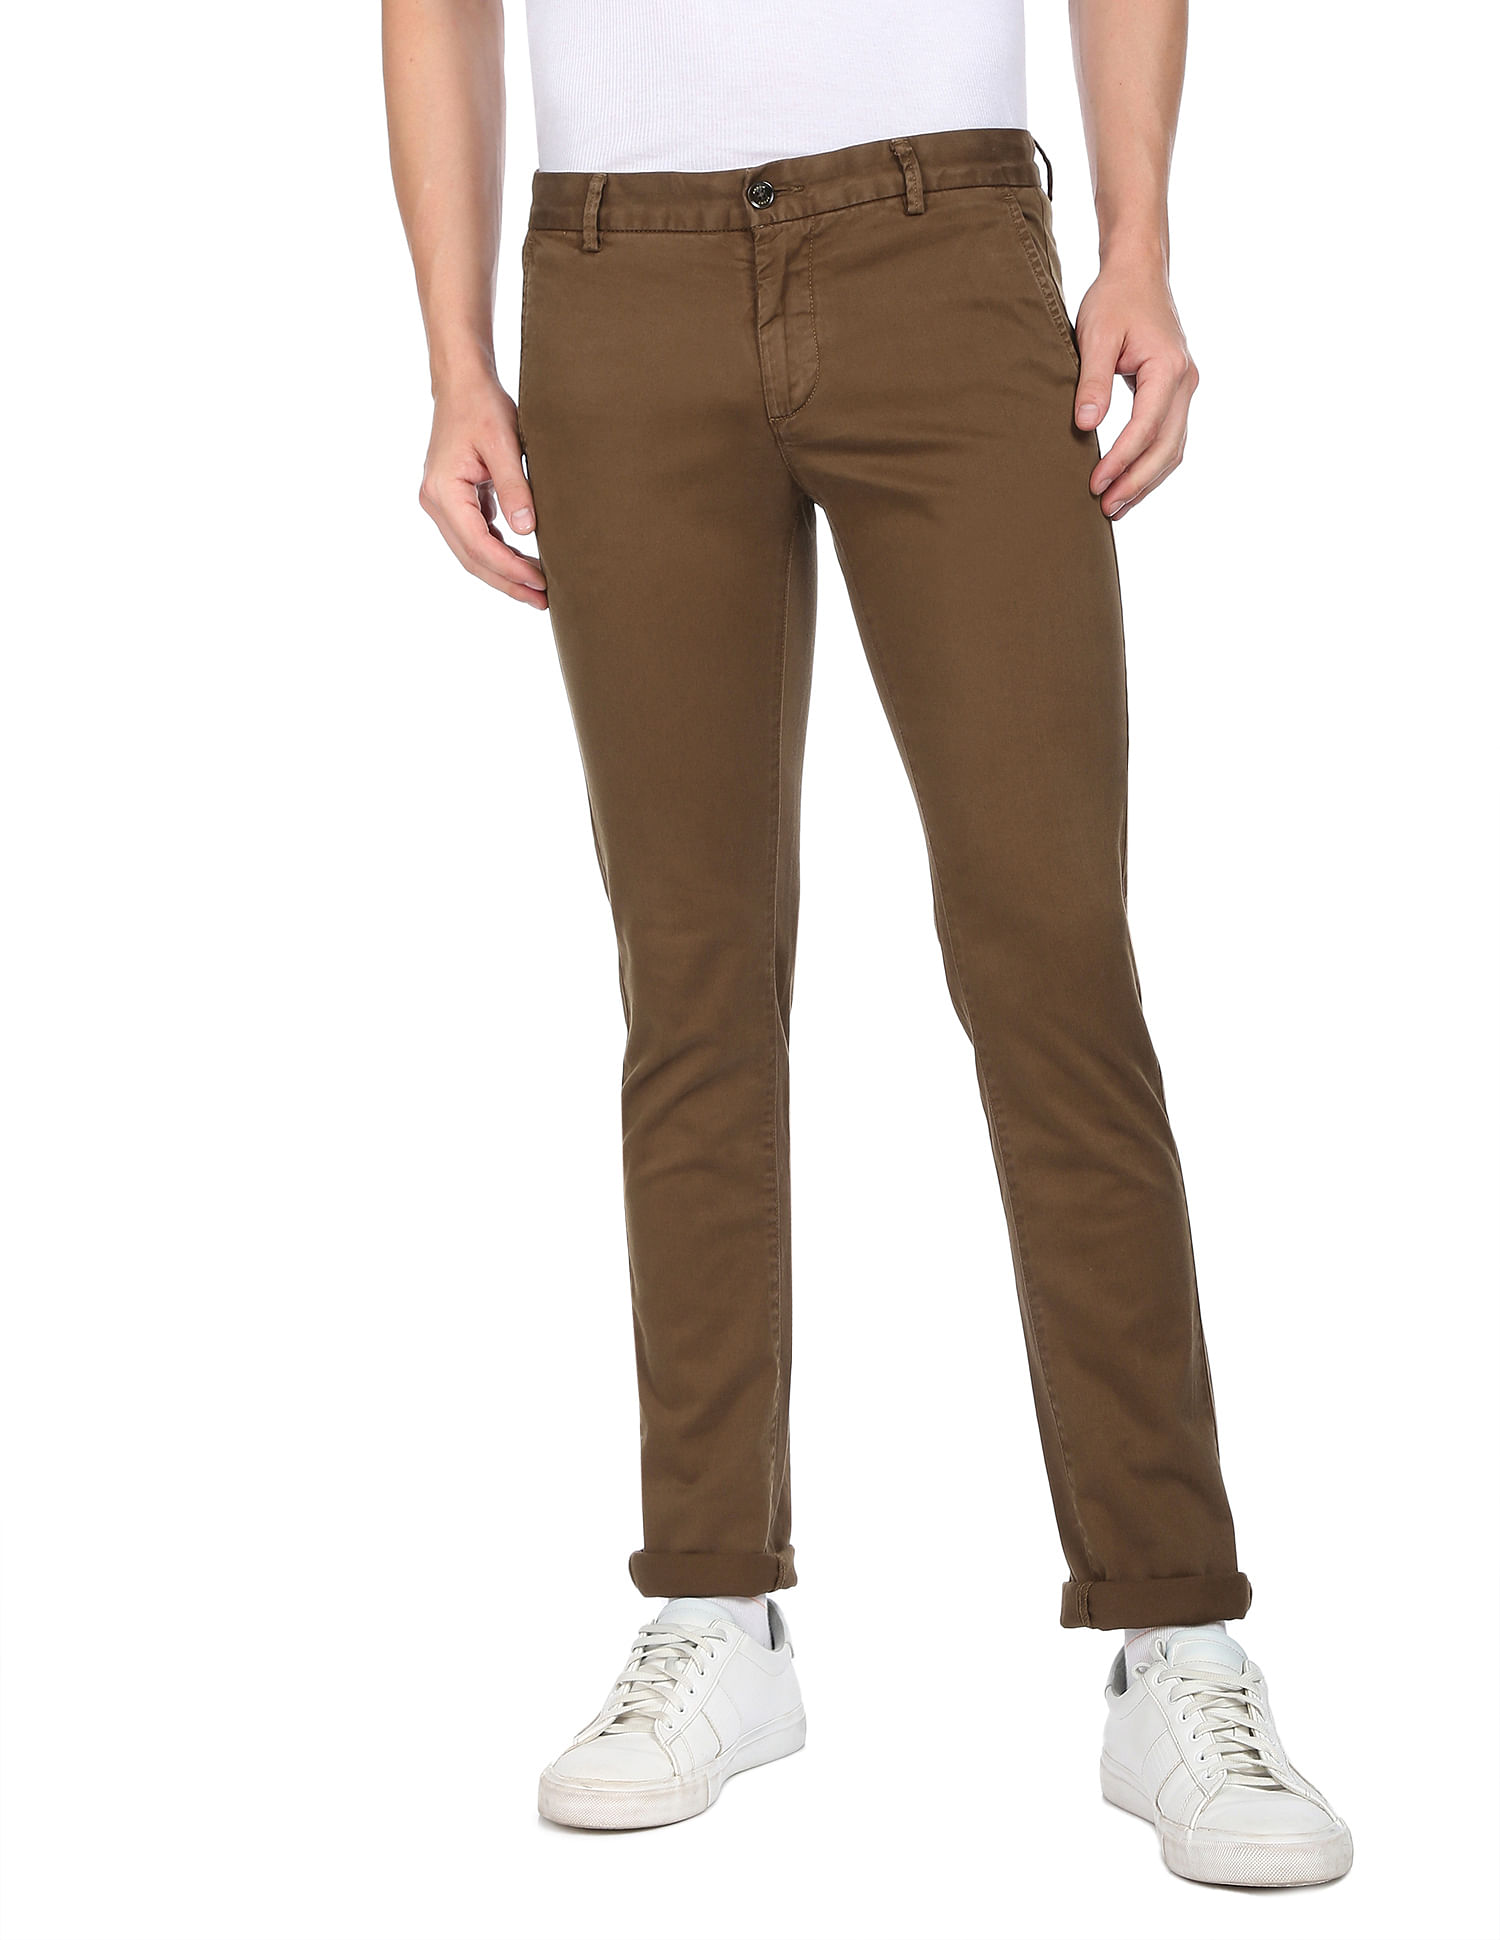 ARROW SPORTS Men Solid Elasticated Trousers  Lifestyle Stores  Puzhakkal   Thrissur